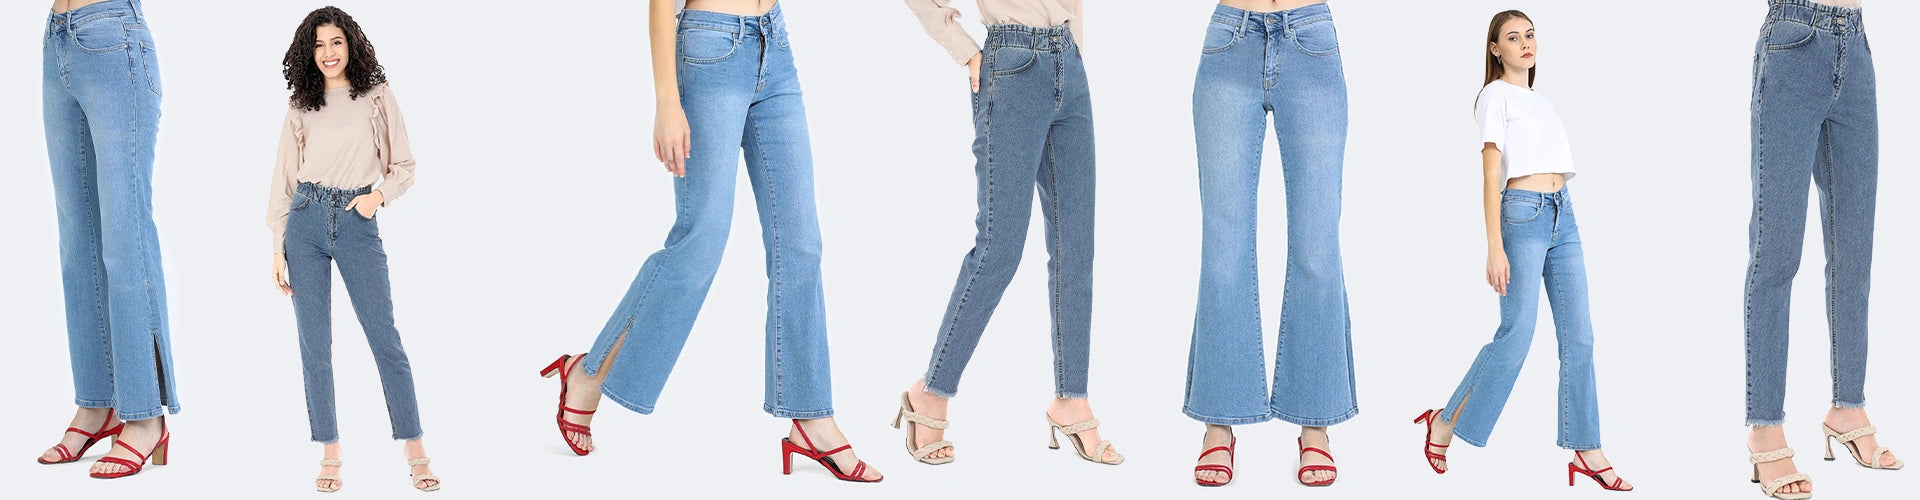 heels with jeans